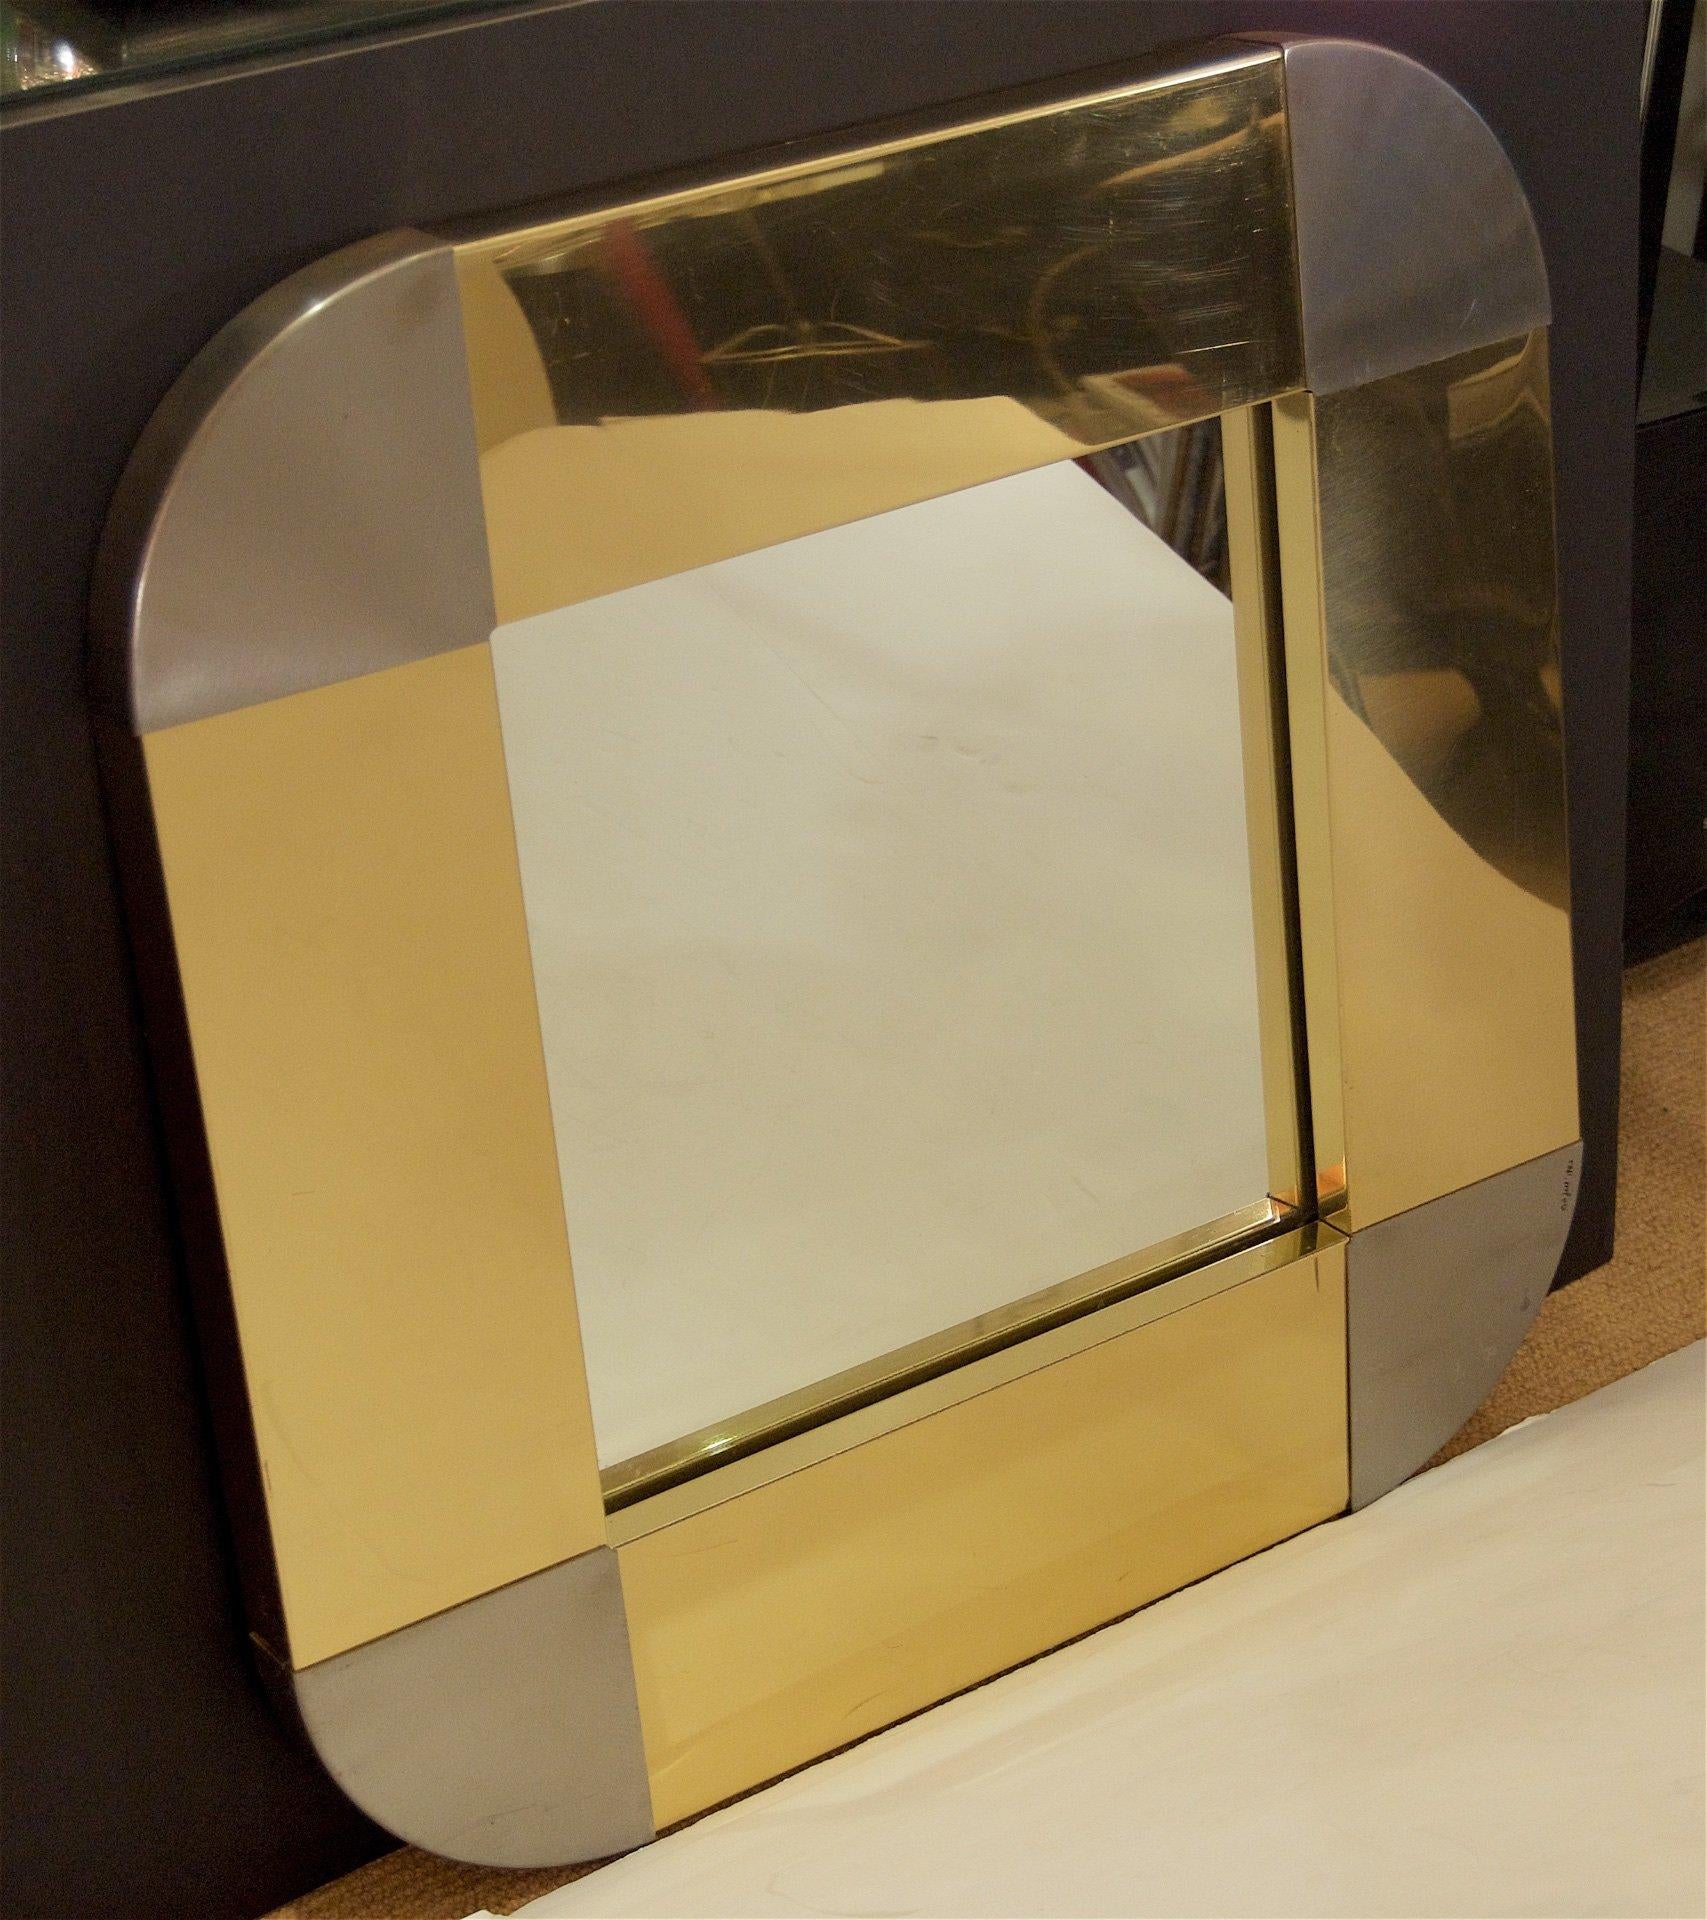 Distinctive Curtis Jere square mirror with brass and steel panels. Inset 16